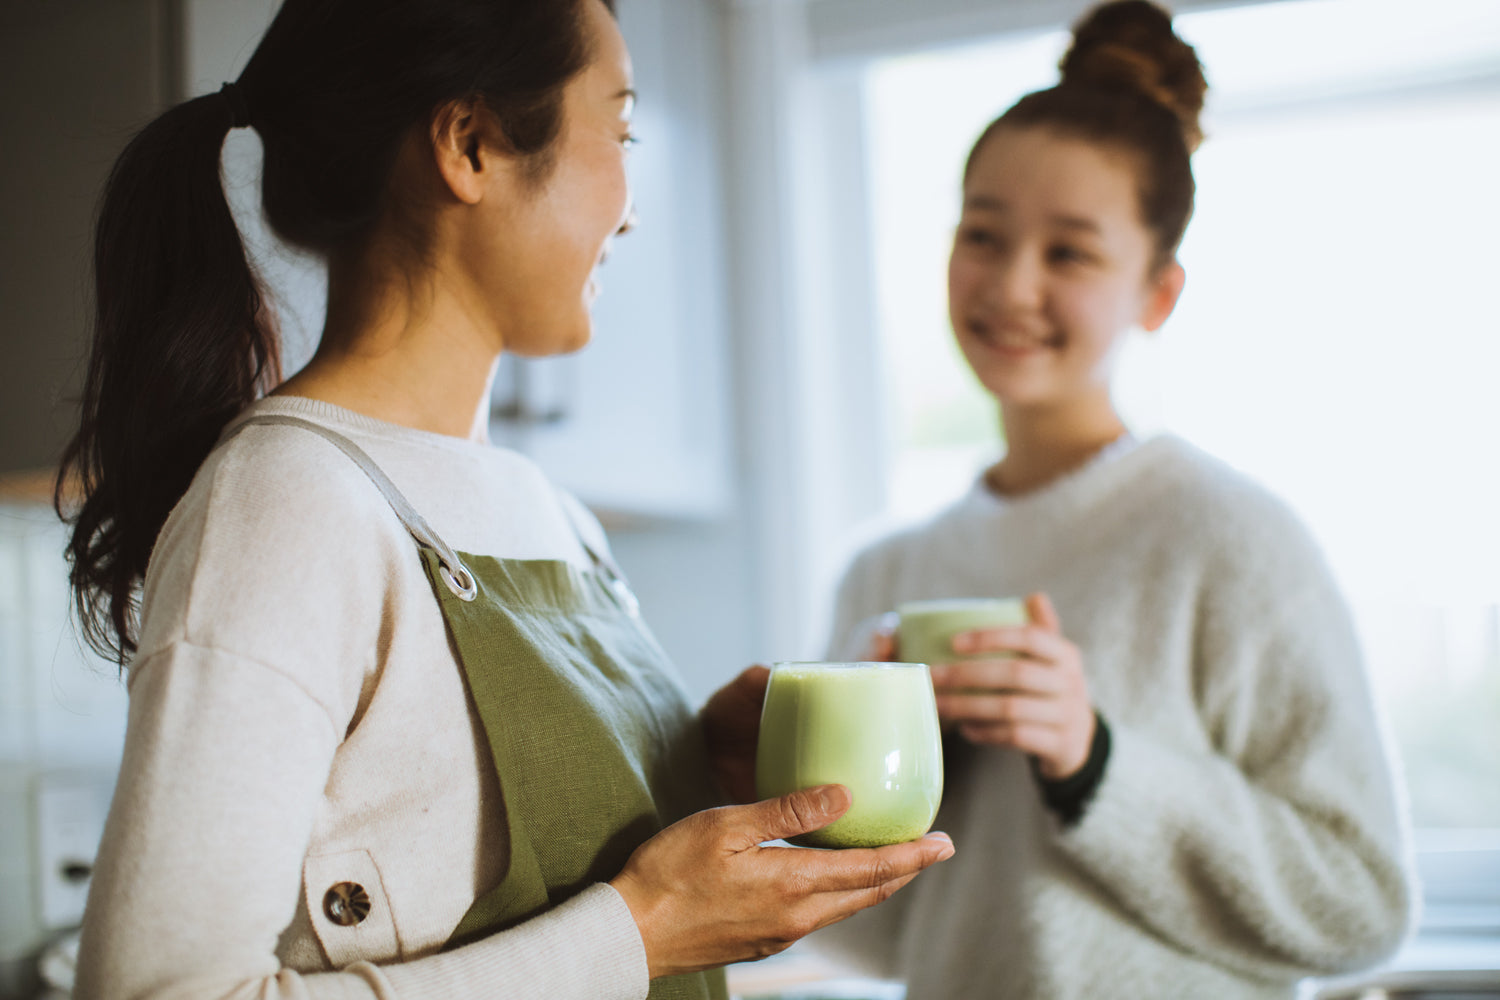 Two women smile and chat, sipping matcha lattes made with freshly-ground matcha.